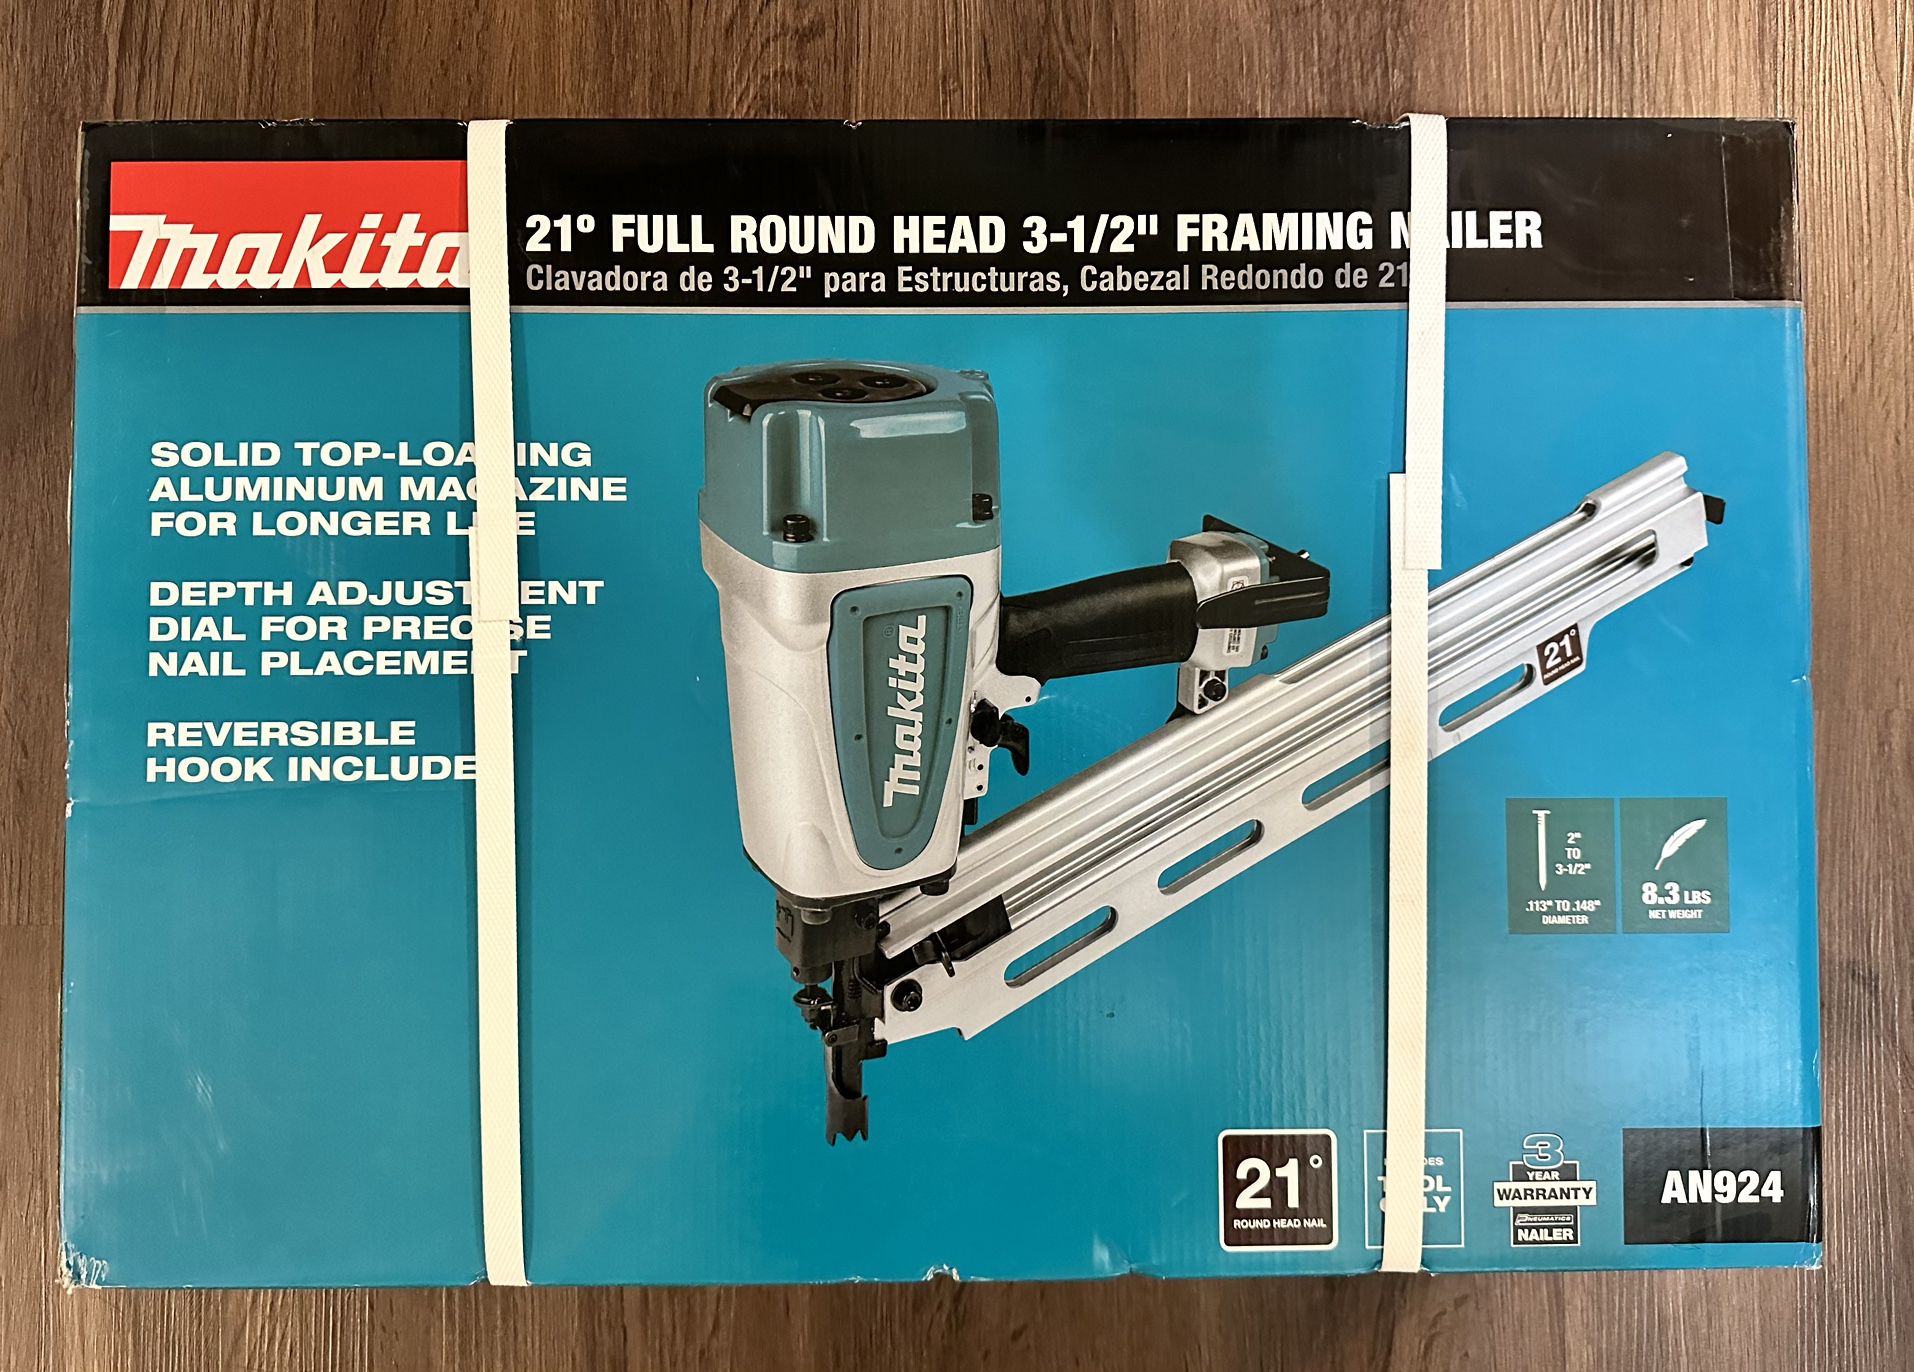 Makita AN924 3-1/2 Inch 21 Degree Full Round Head Pneumatic Framing Nailer  NEW for Sale in Wheaton-glenmont, MD OfferUp